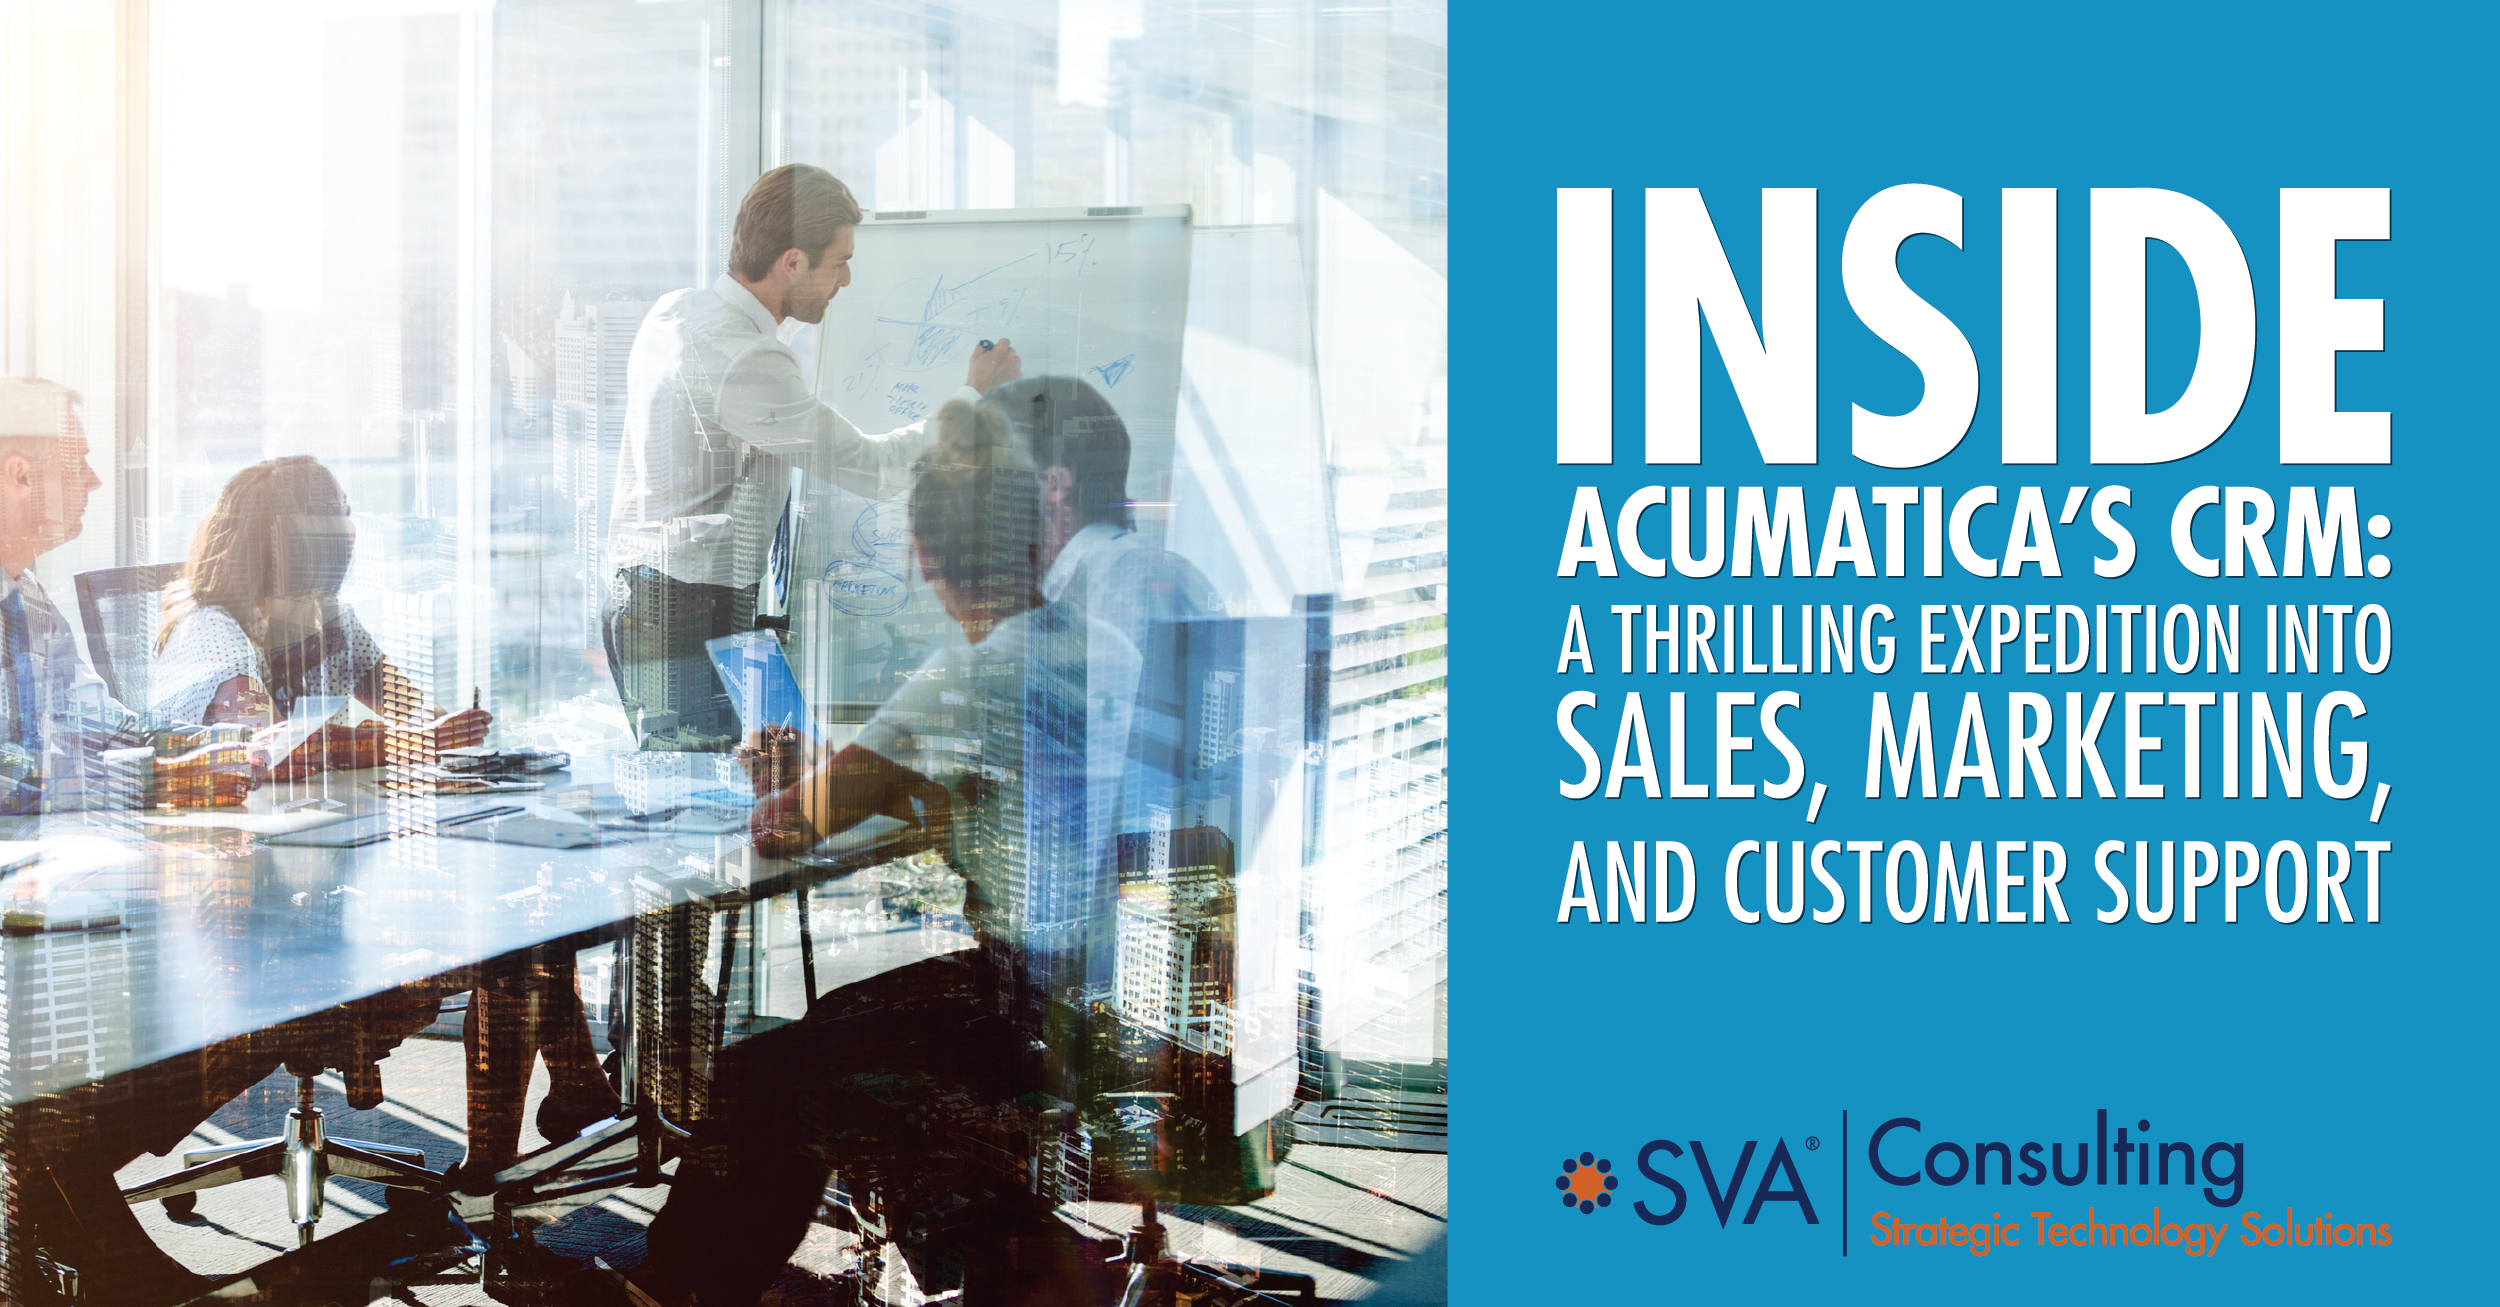 Inside Acumatica's CRM: A Thrilling Expedition into Sales, Marketing, and Customer Support